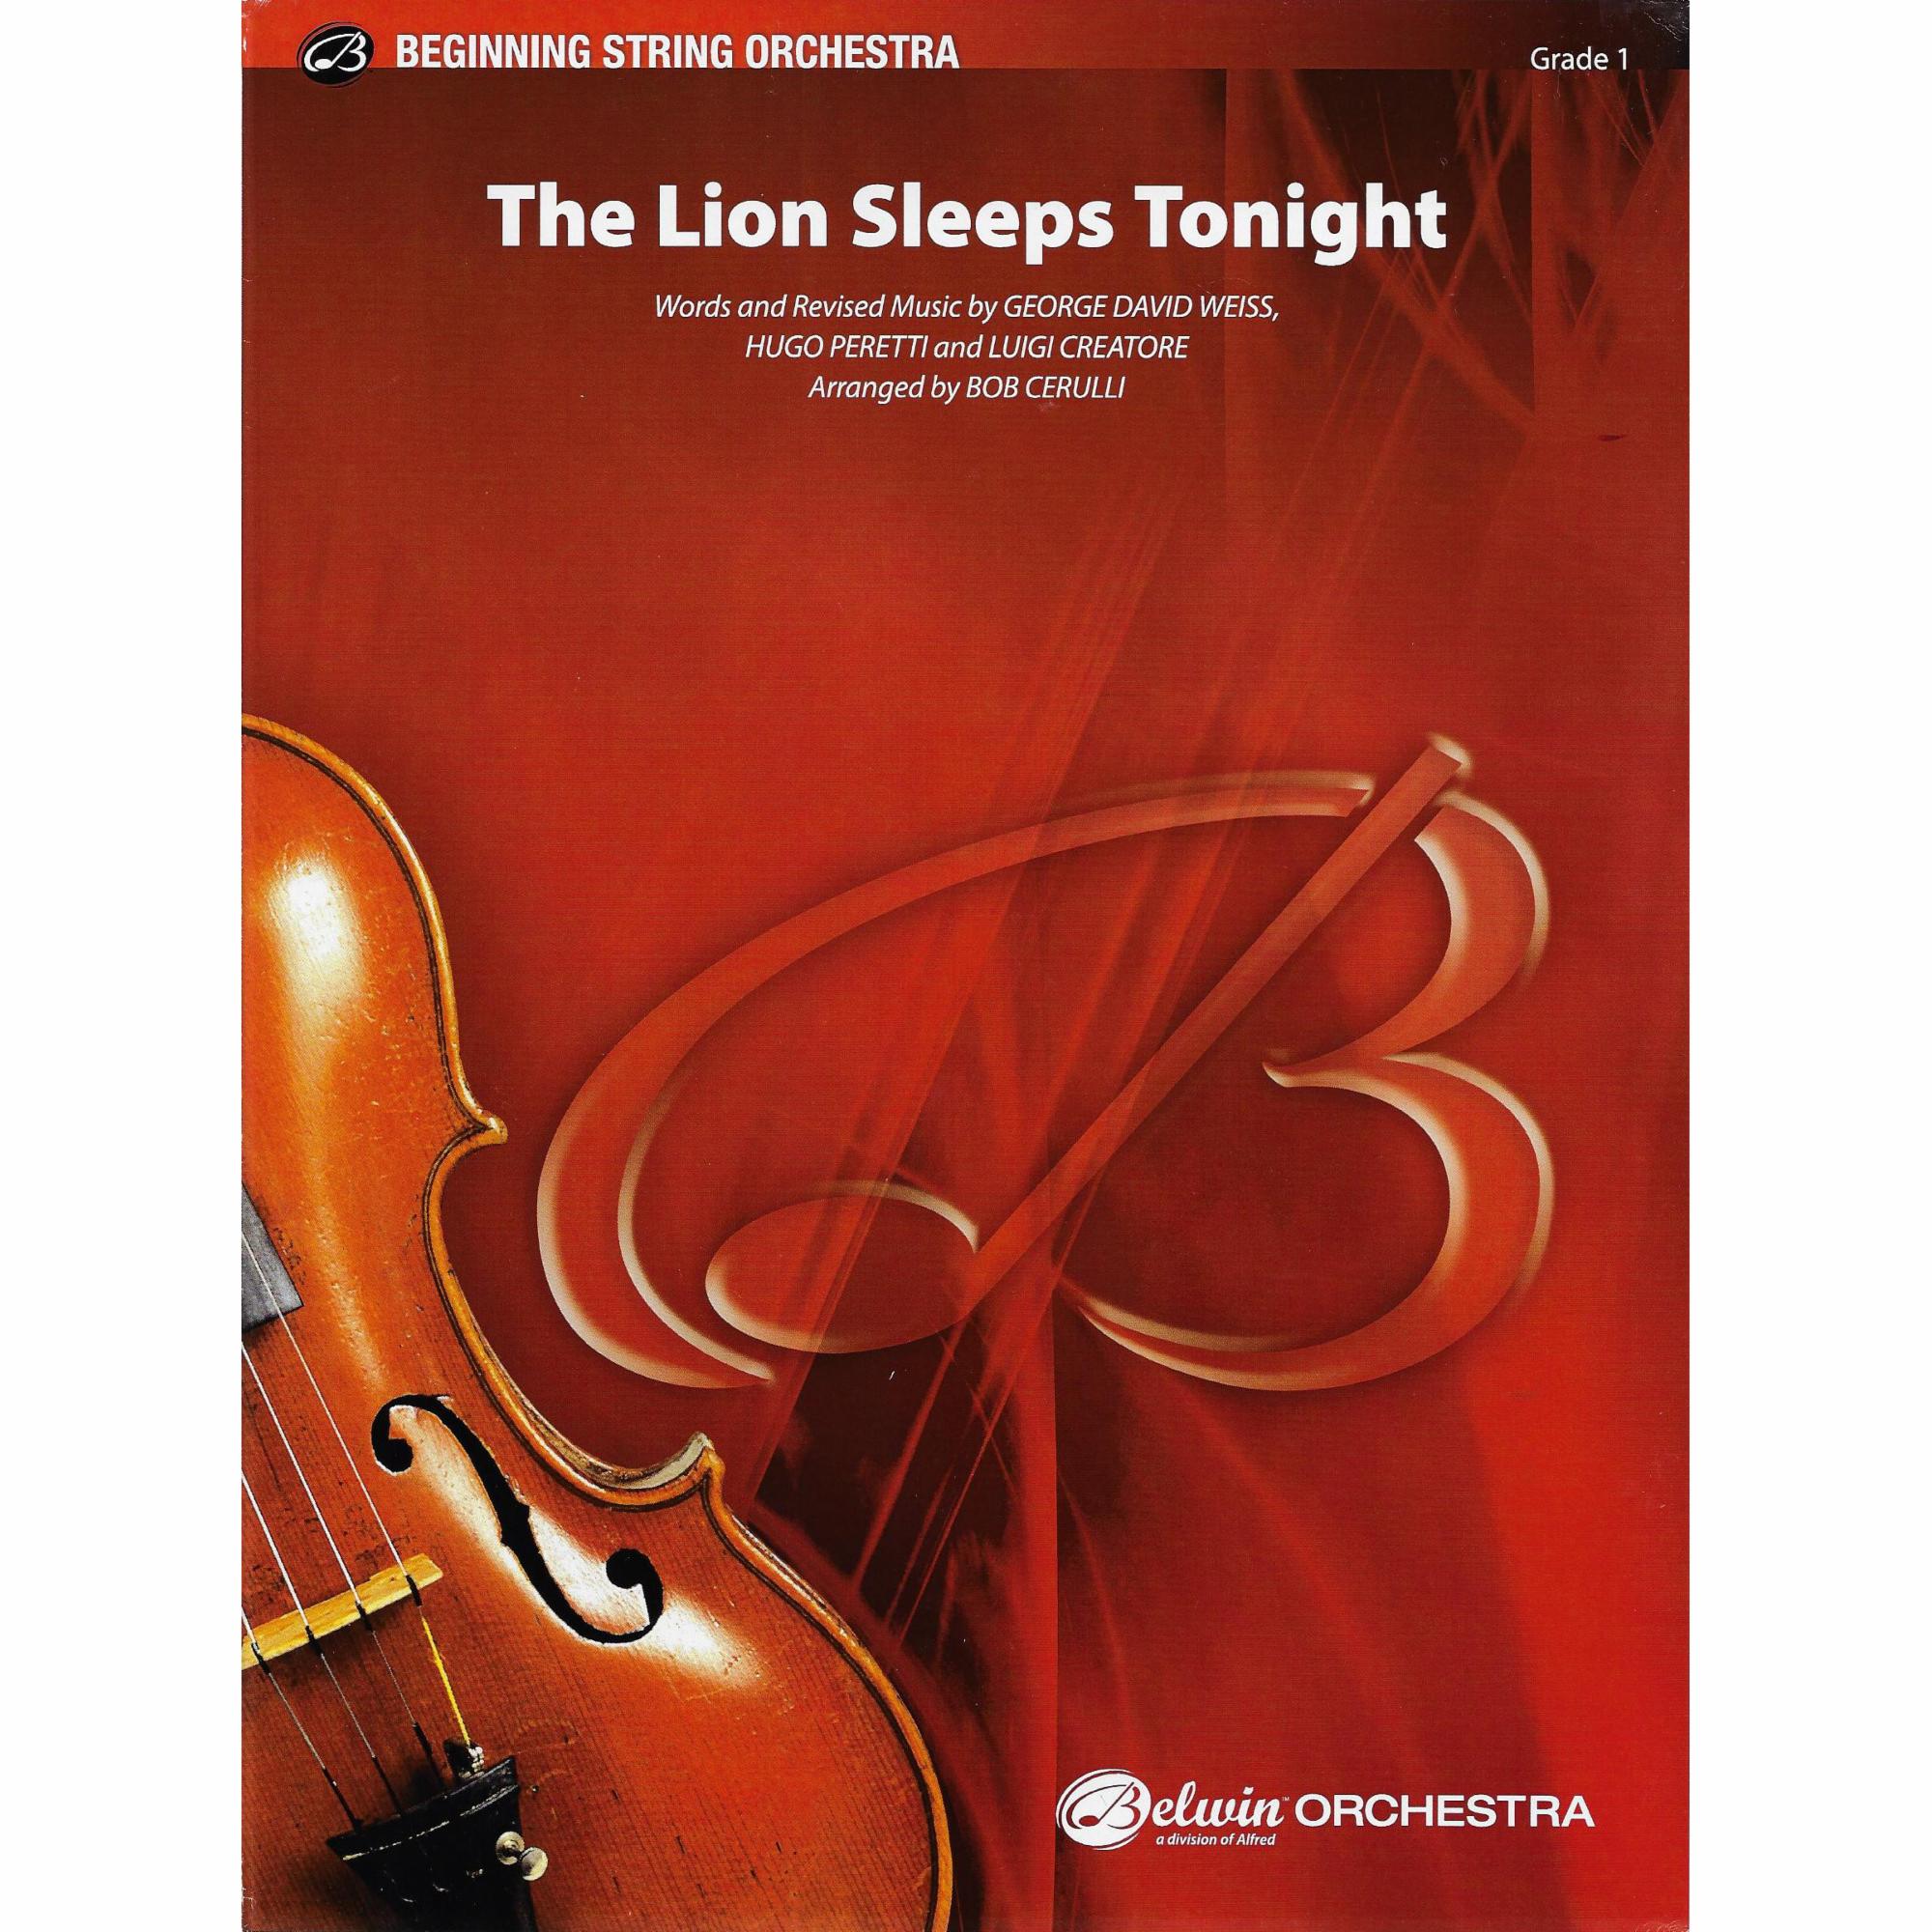 The Lion Sleeps Tonight for String Orchestra